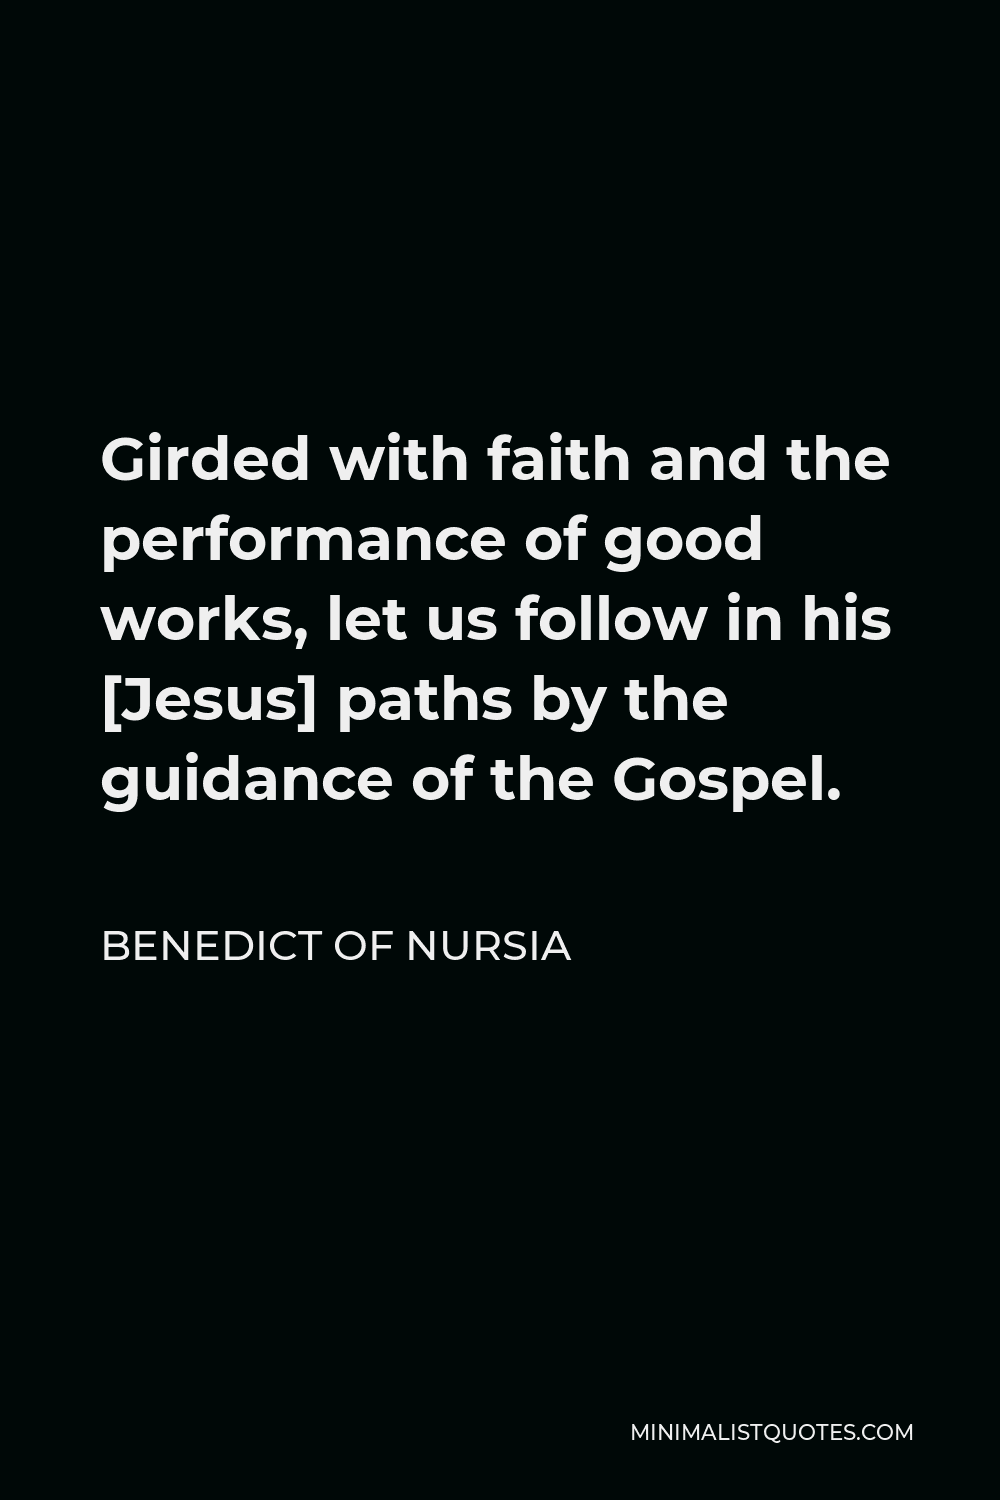 Benedict of Nursia Quote - Girded with faith and the performance of good works, let us follow in his [Jesus] paths by the guidance of the Gospel.